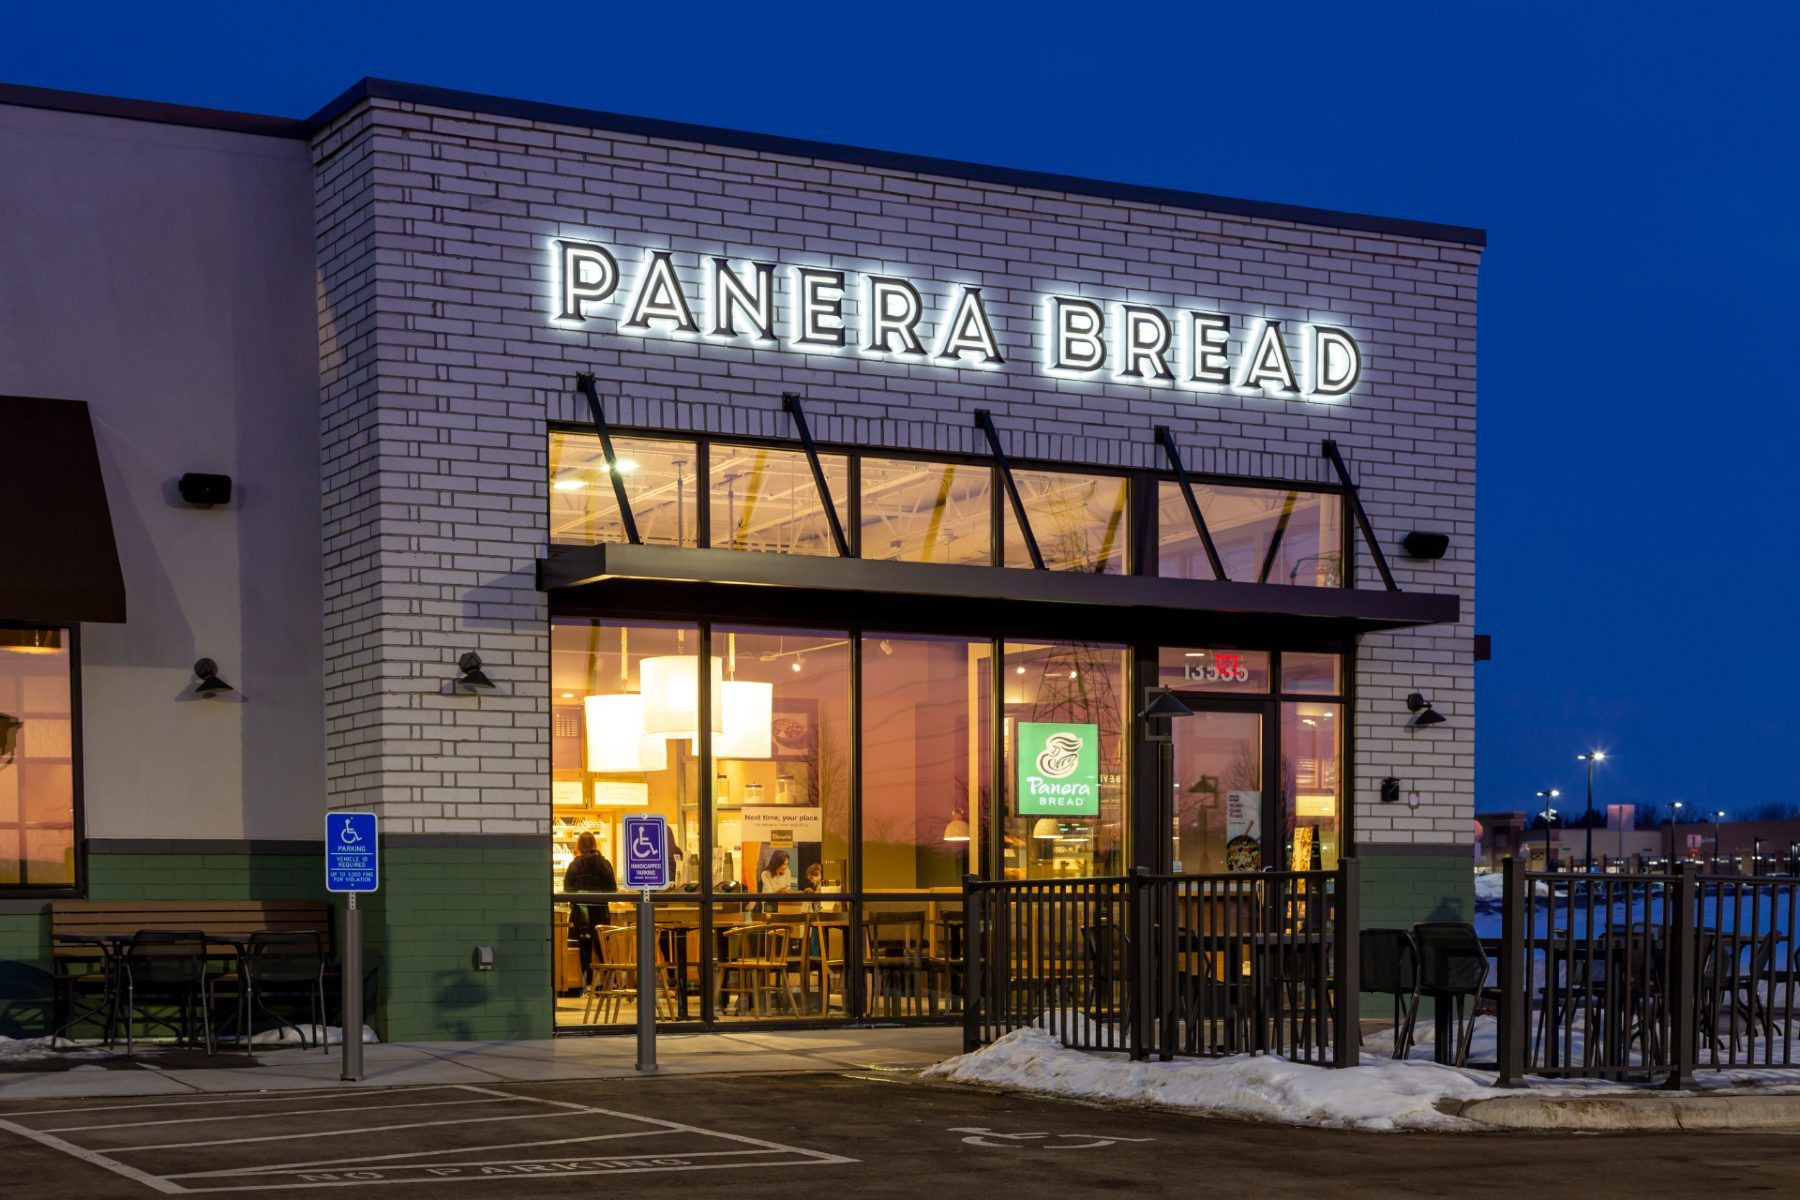 Panera Bread storefront in the evening - clean food